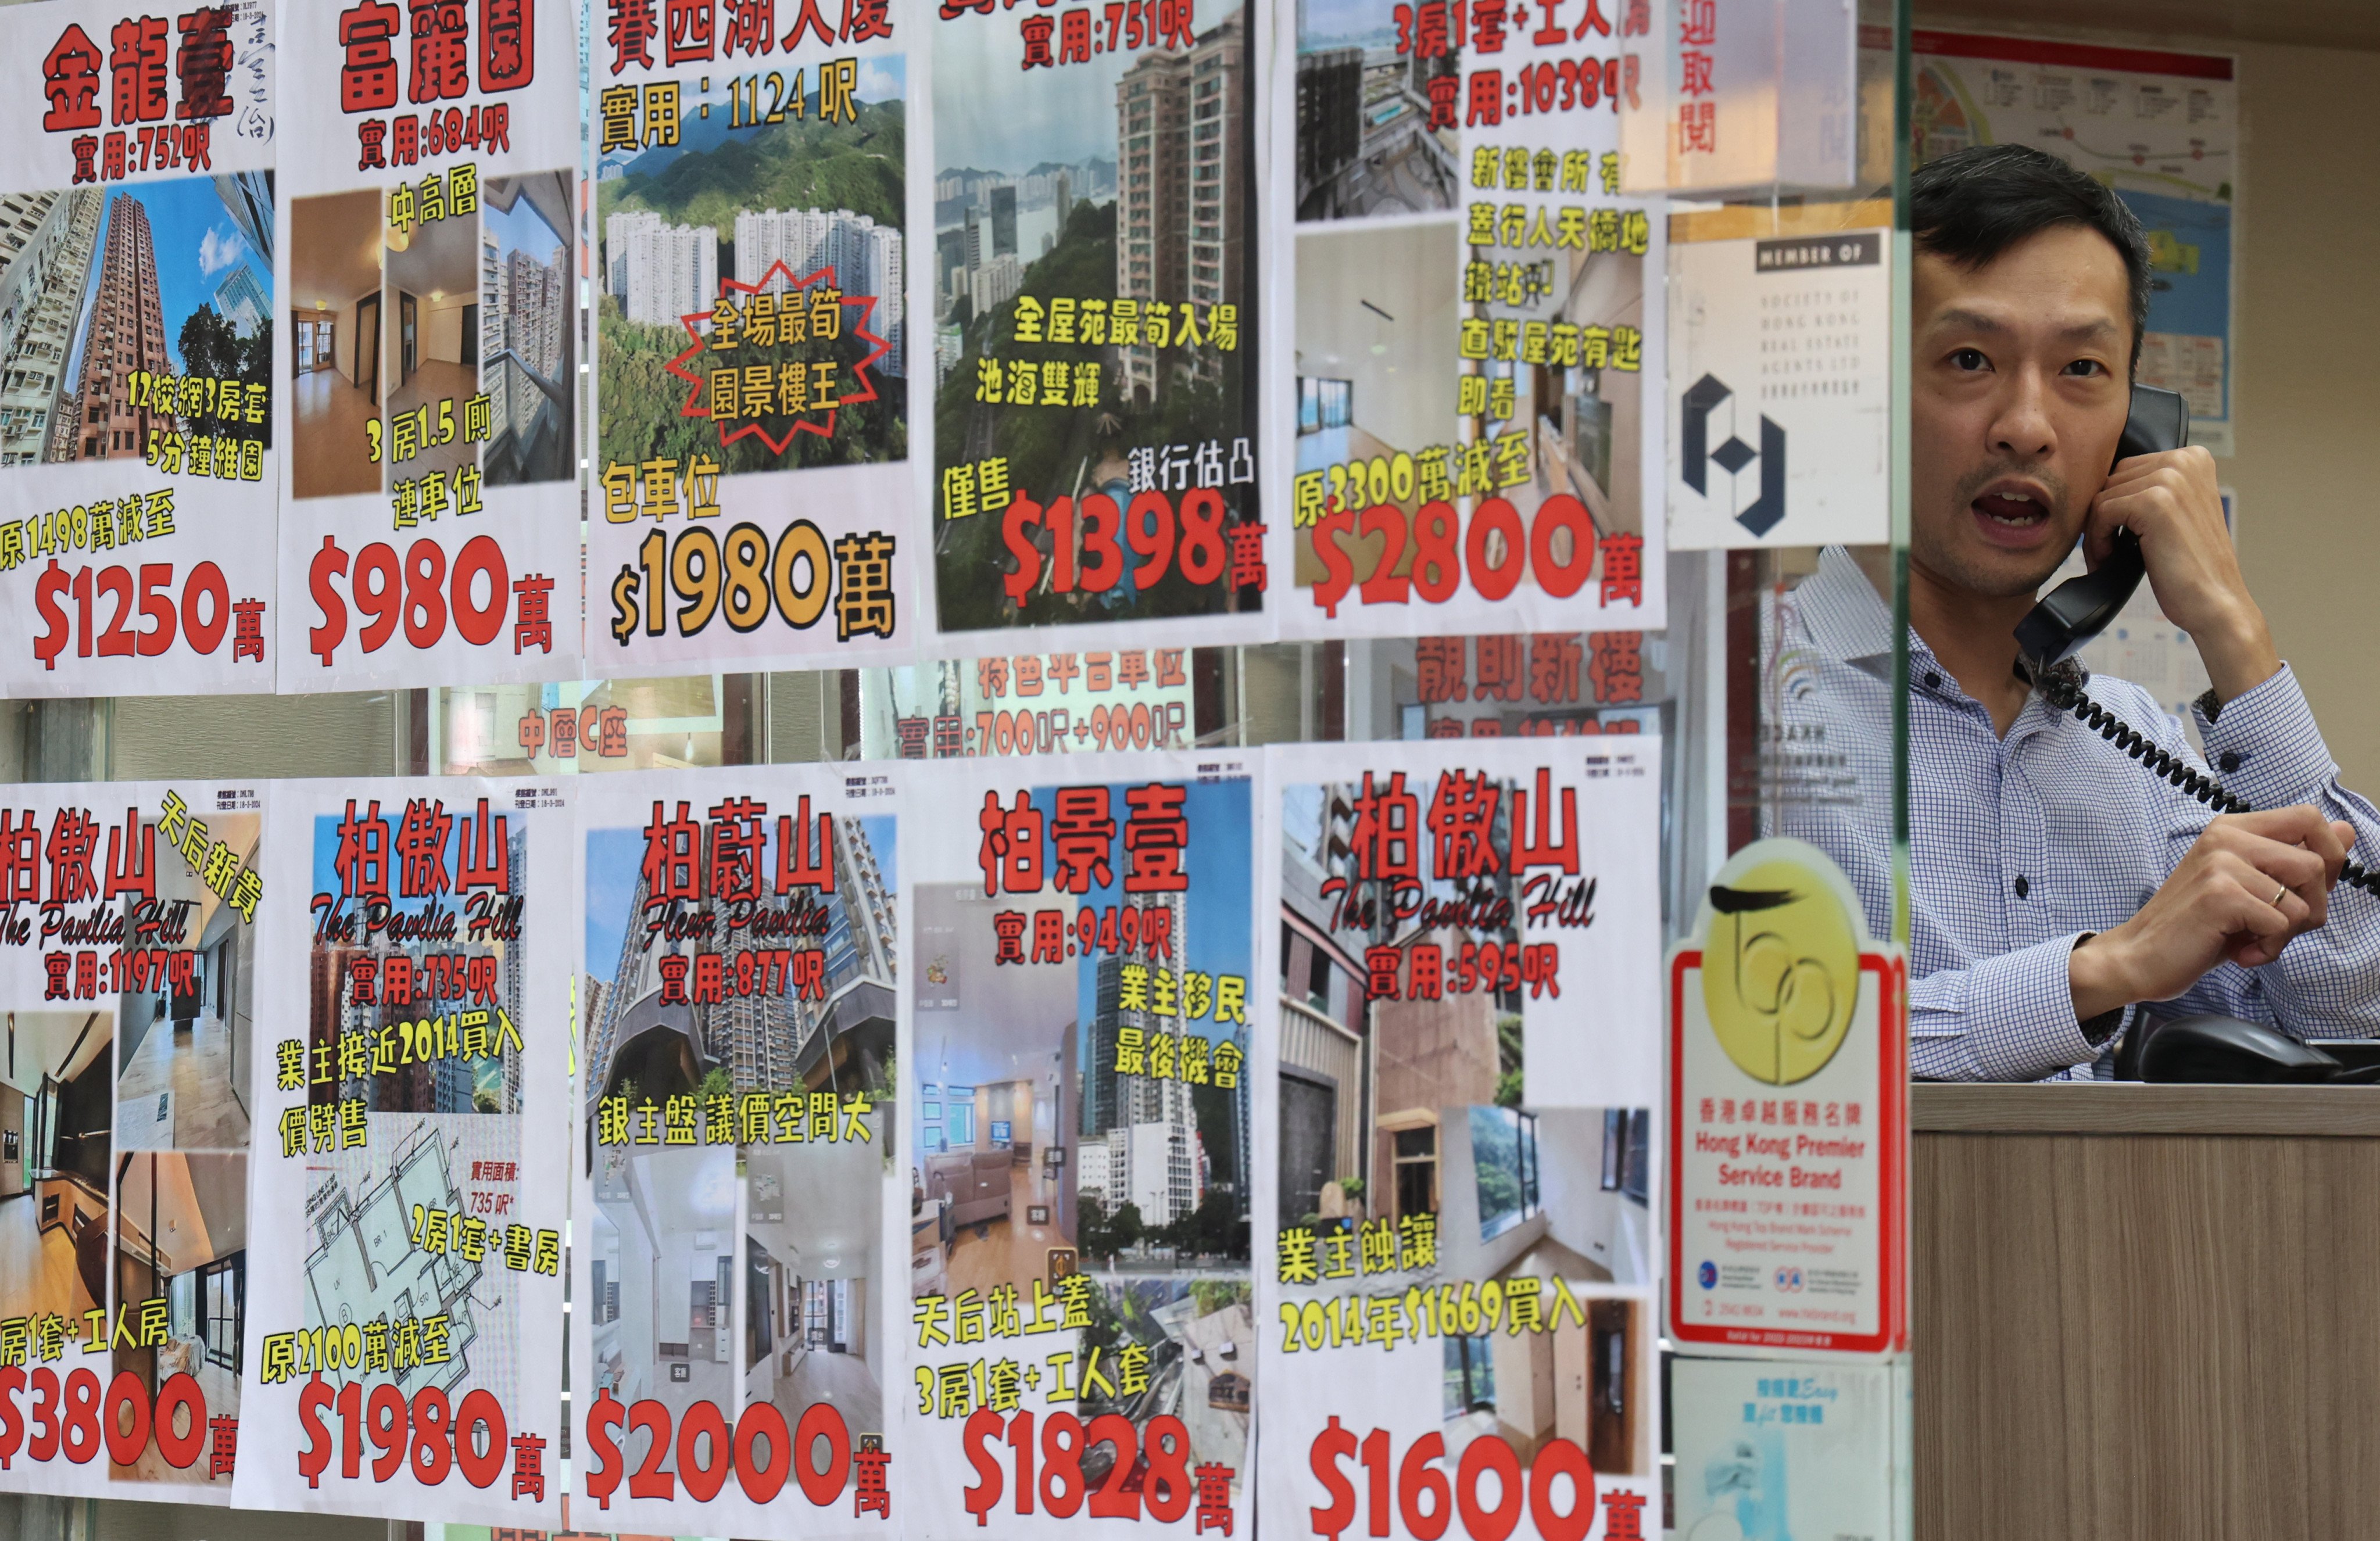 Prices of new and lived-in homes are listed at a property agency in Tin Hau. Photo: Jelly Tse